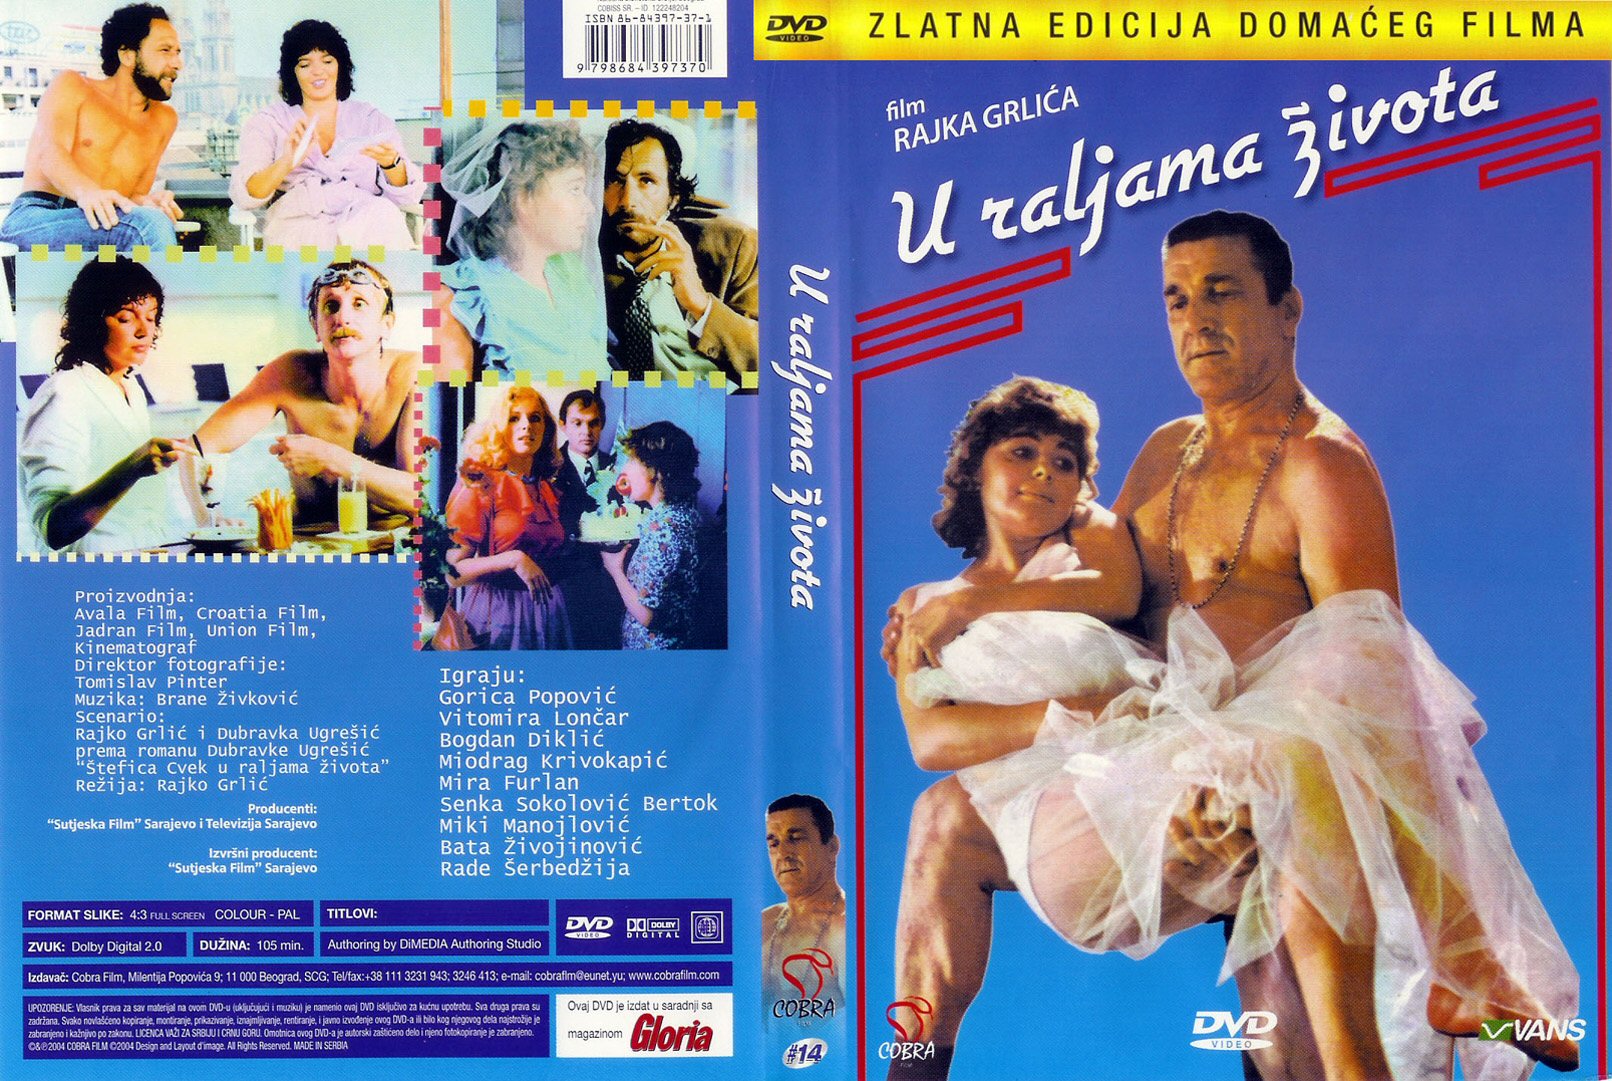 Click to view full size image -  DVD Cover - U - u_raljama_zivota_dvd - u_raljama_zivota_dvd.jpg